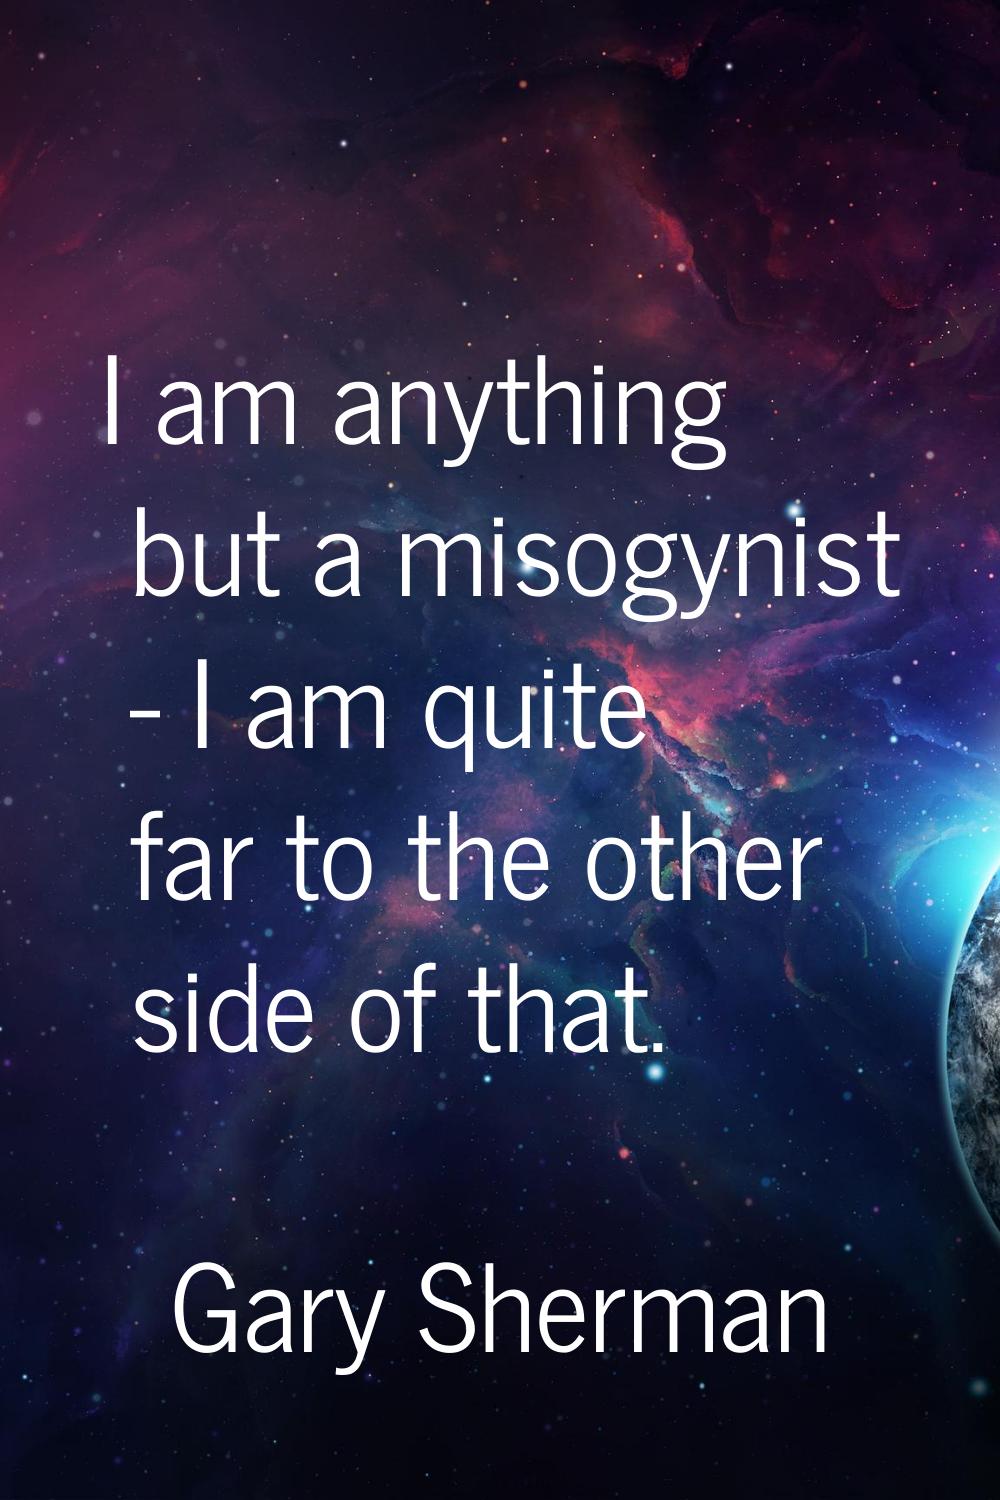 I am anything but a misogynist - I am quite far to the other side of that.